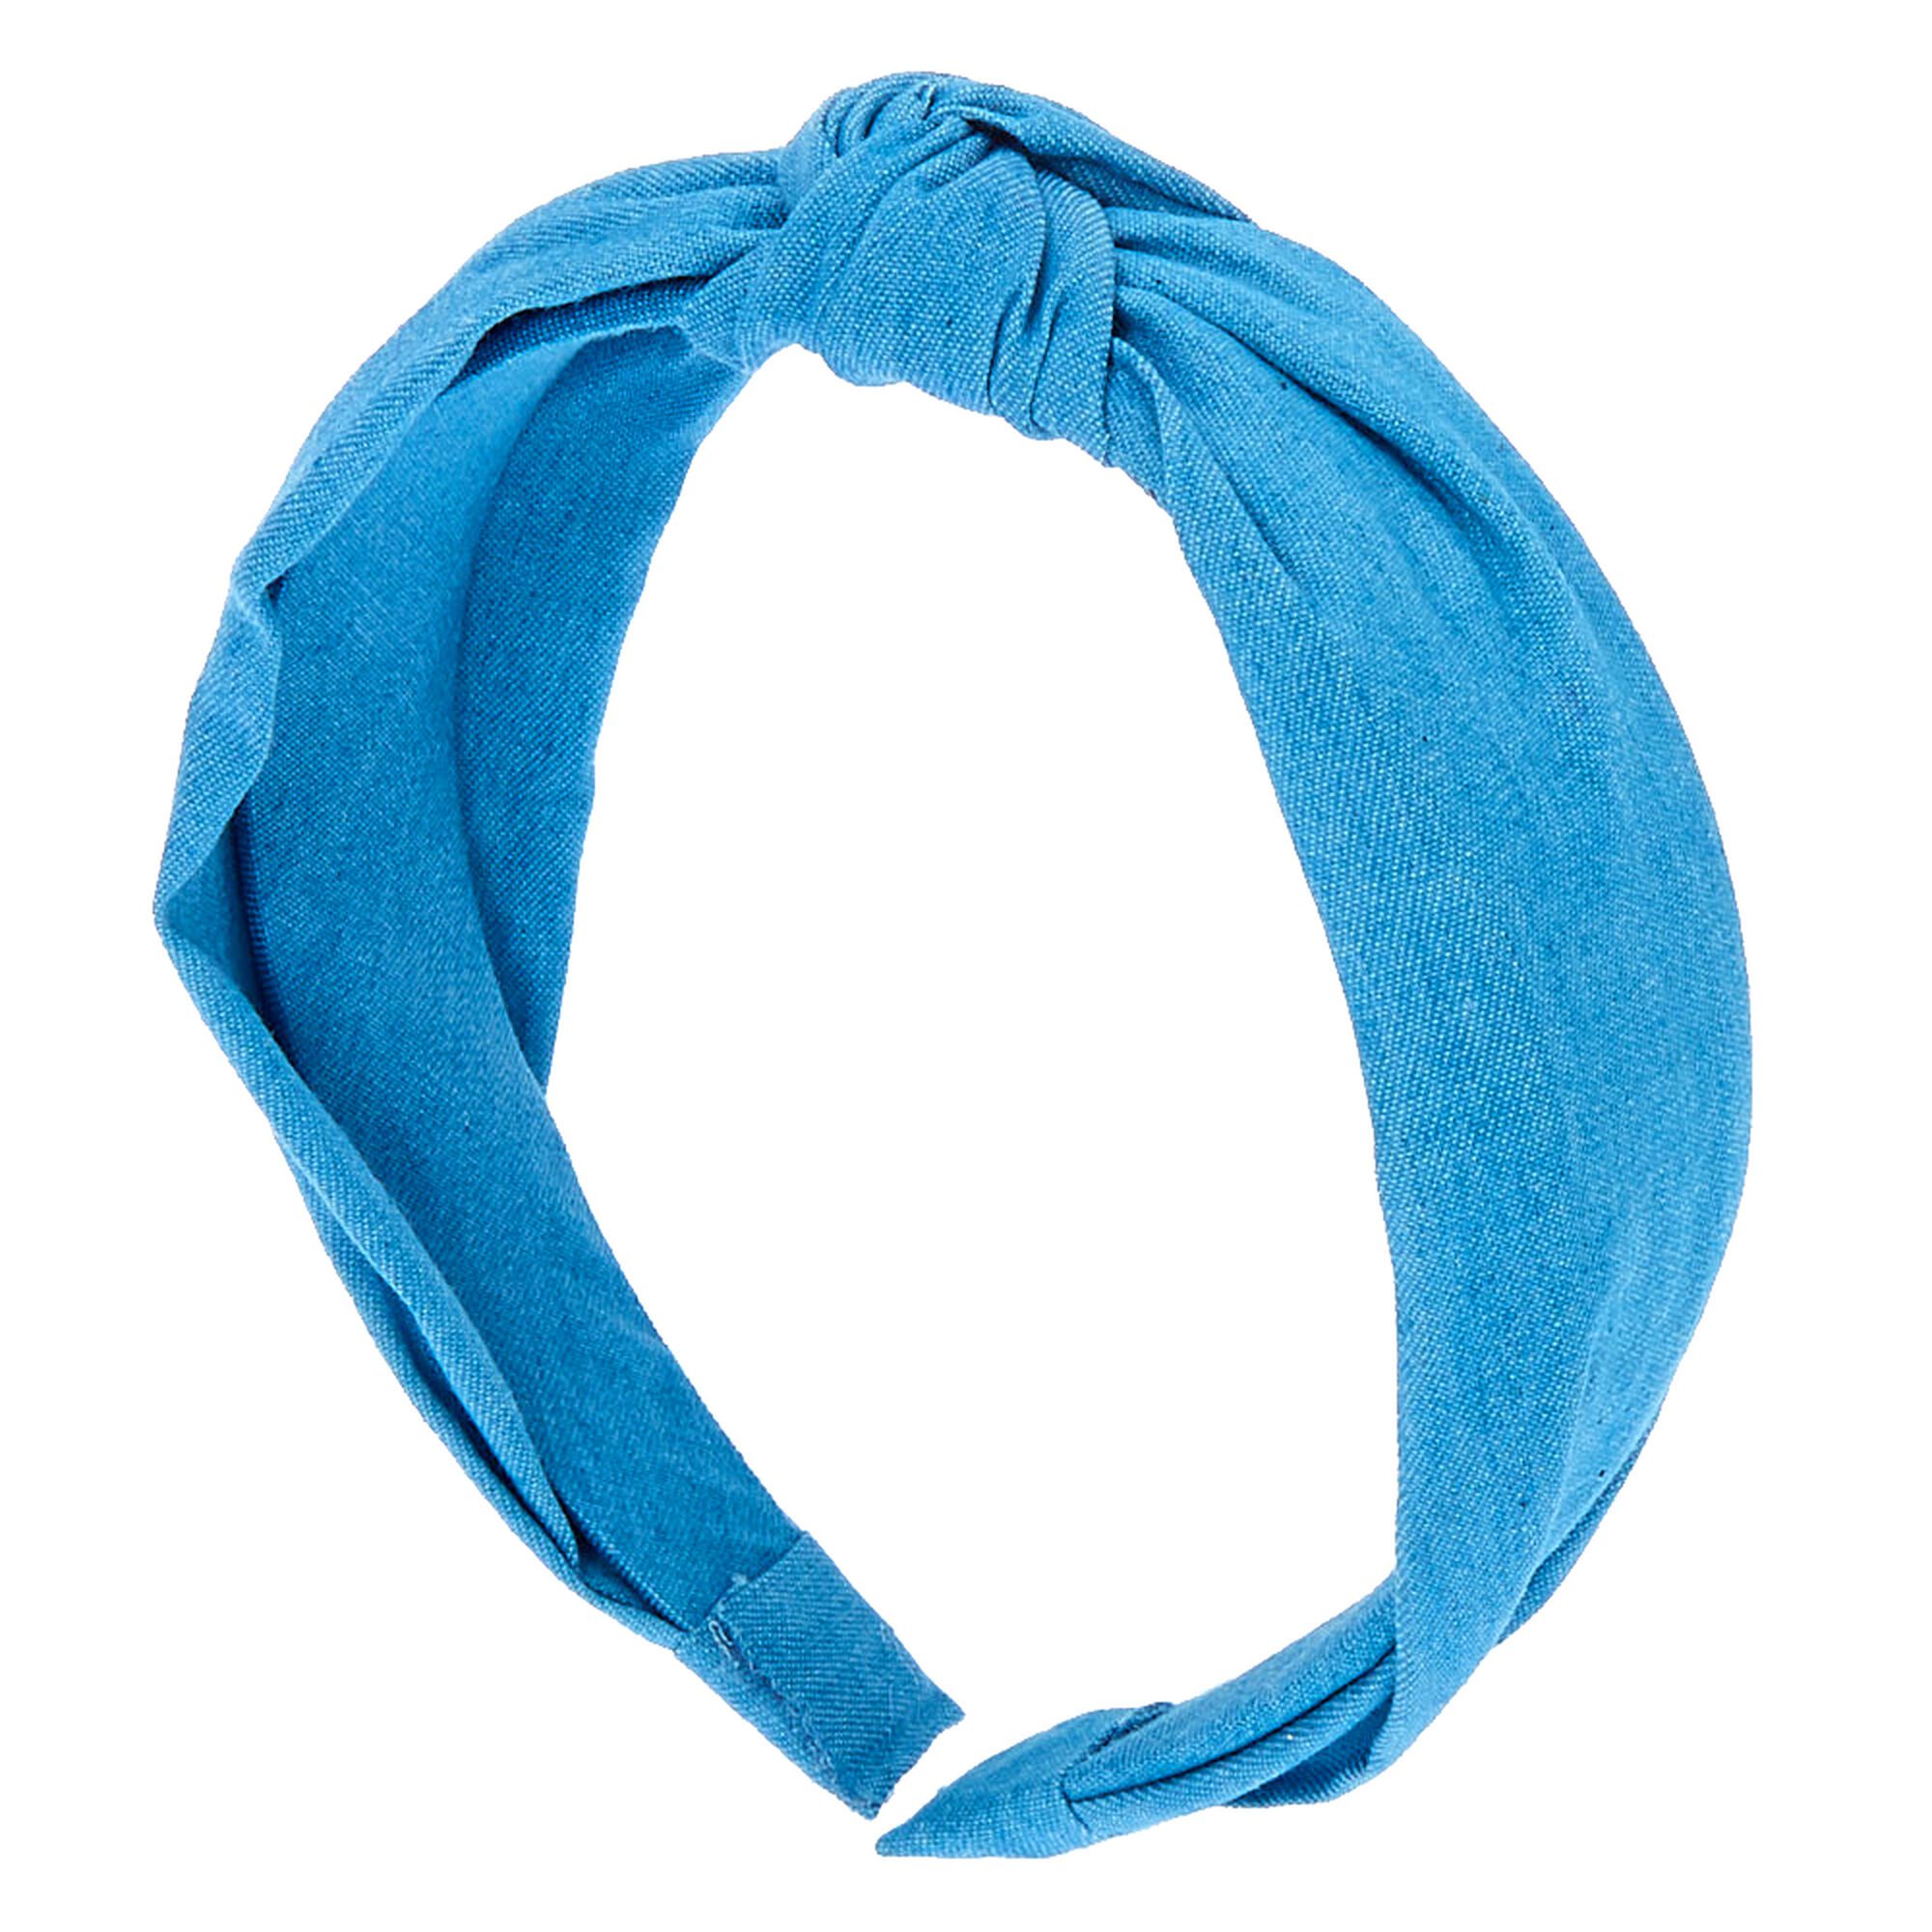 View Claires Denim Knotted Headband Blue information